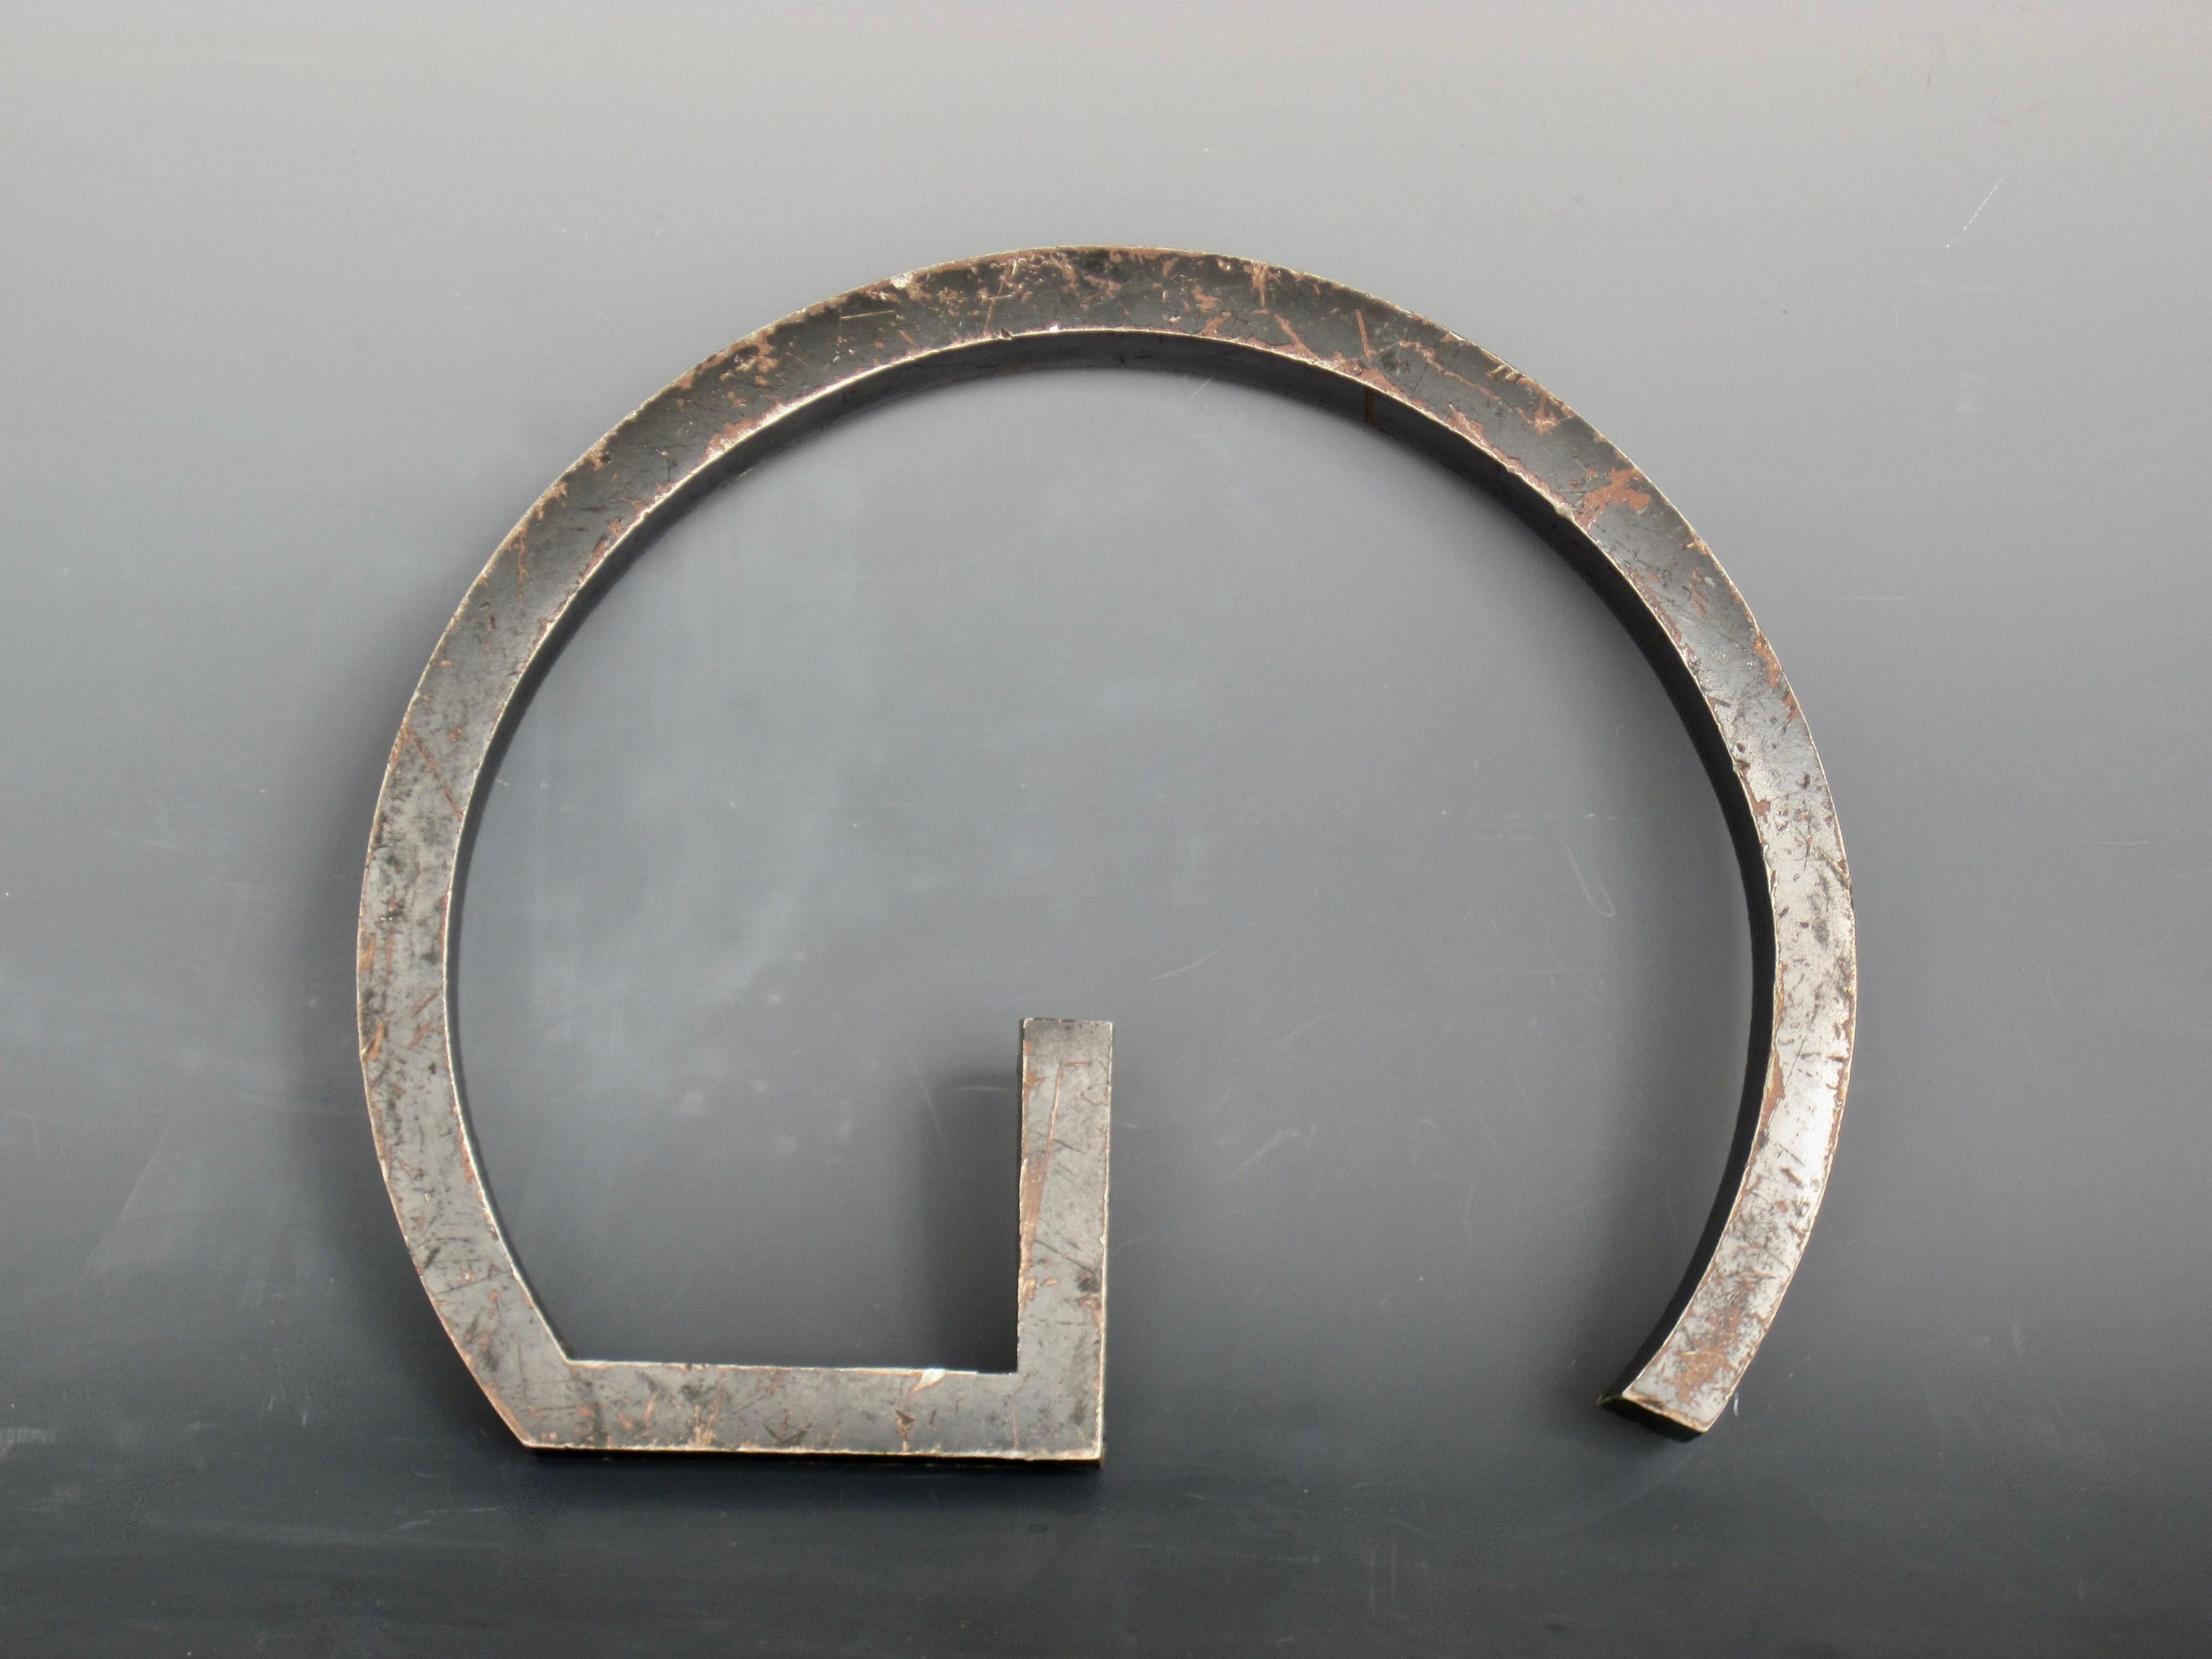 Weathered black solid metal letter G emblem. Four screw holes on reverse for mounting. A lot of character from the patina and scratches showing it's usage over time.